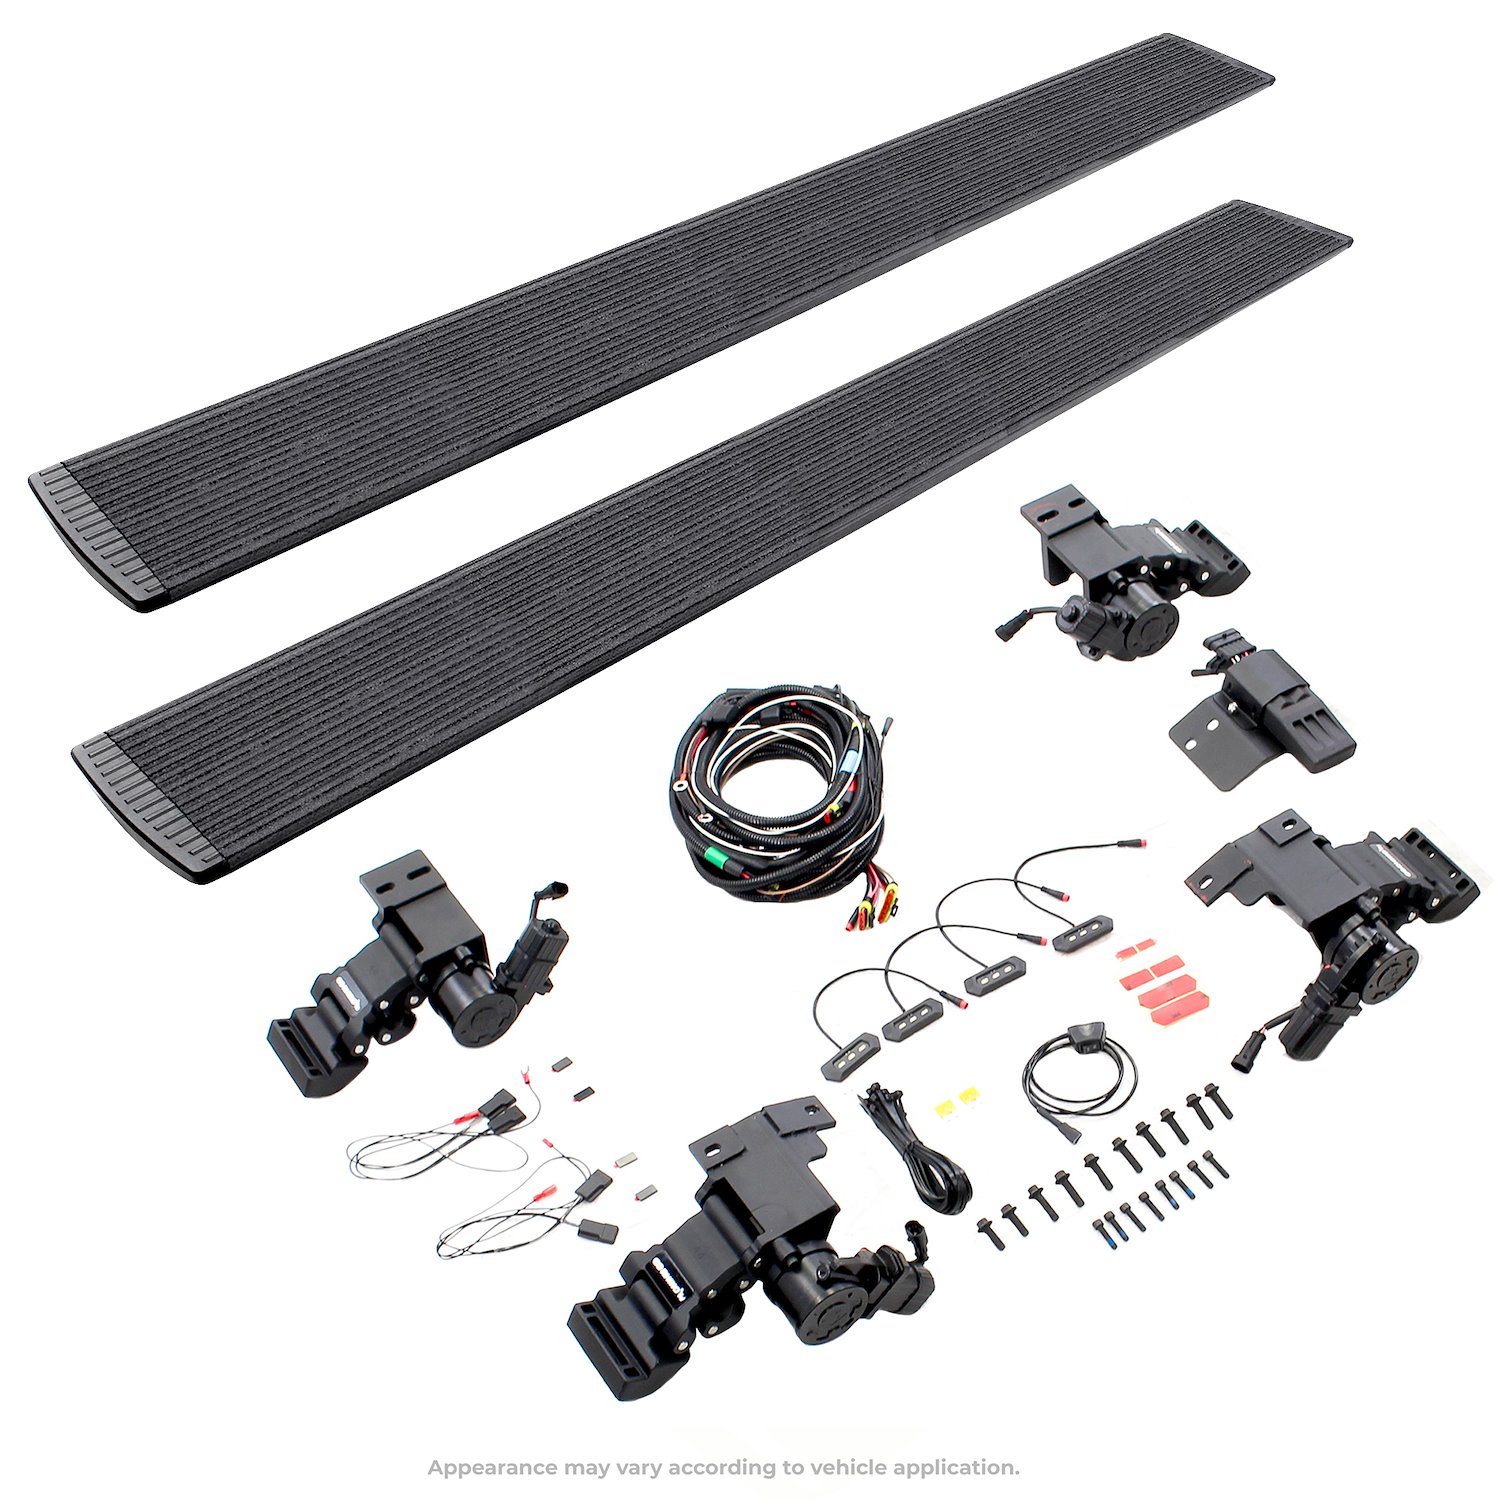 E1 Electric Running Board Kit Fits Select GMC Yukon XL Sport Utility - Diesel Only